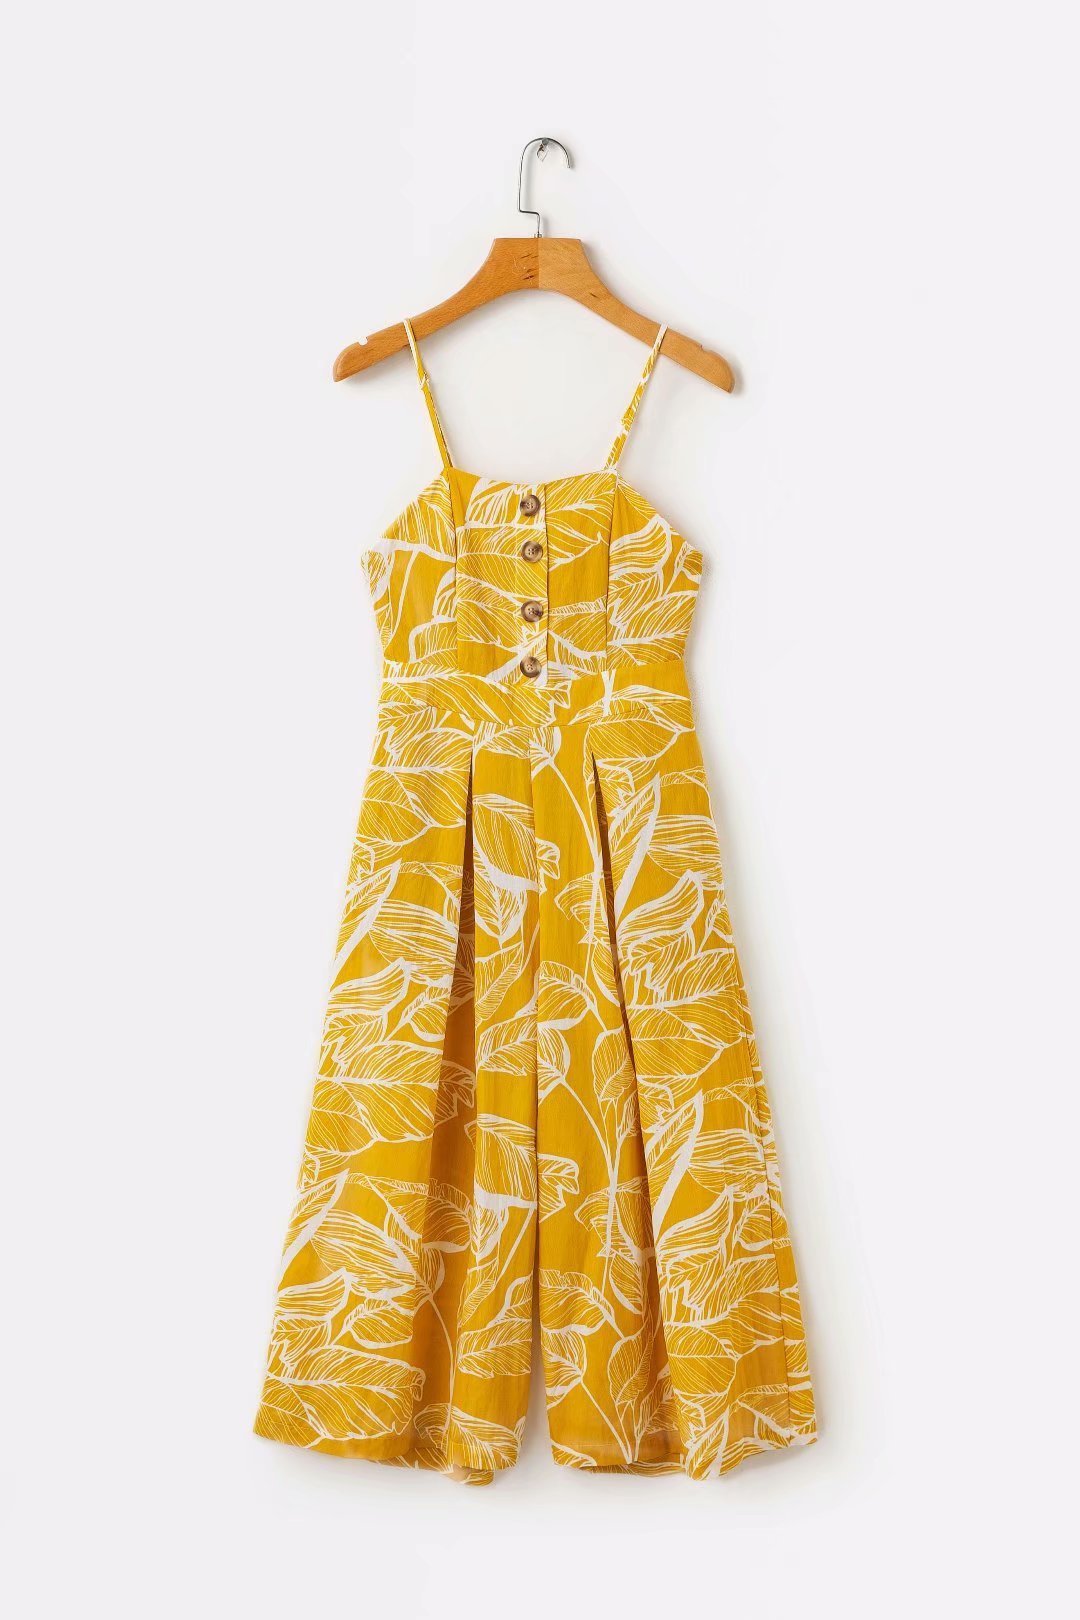 Meselling99 Print Spaghetti Strap Wide Leg Pants Pockets Jumpsuit-jumpsuit-S-Yellow-Free Shipping at meselling99